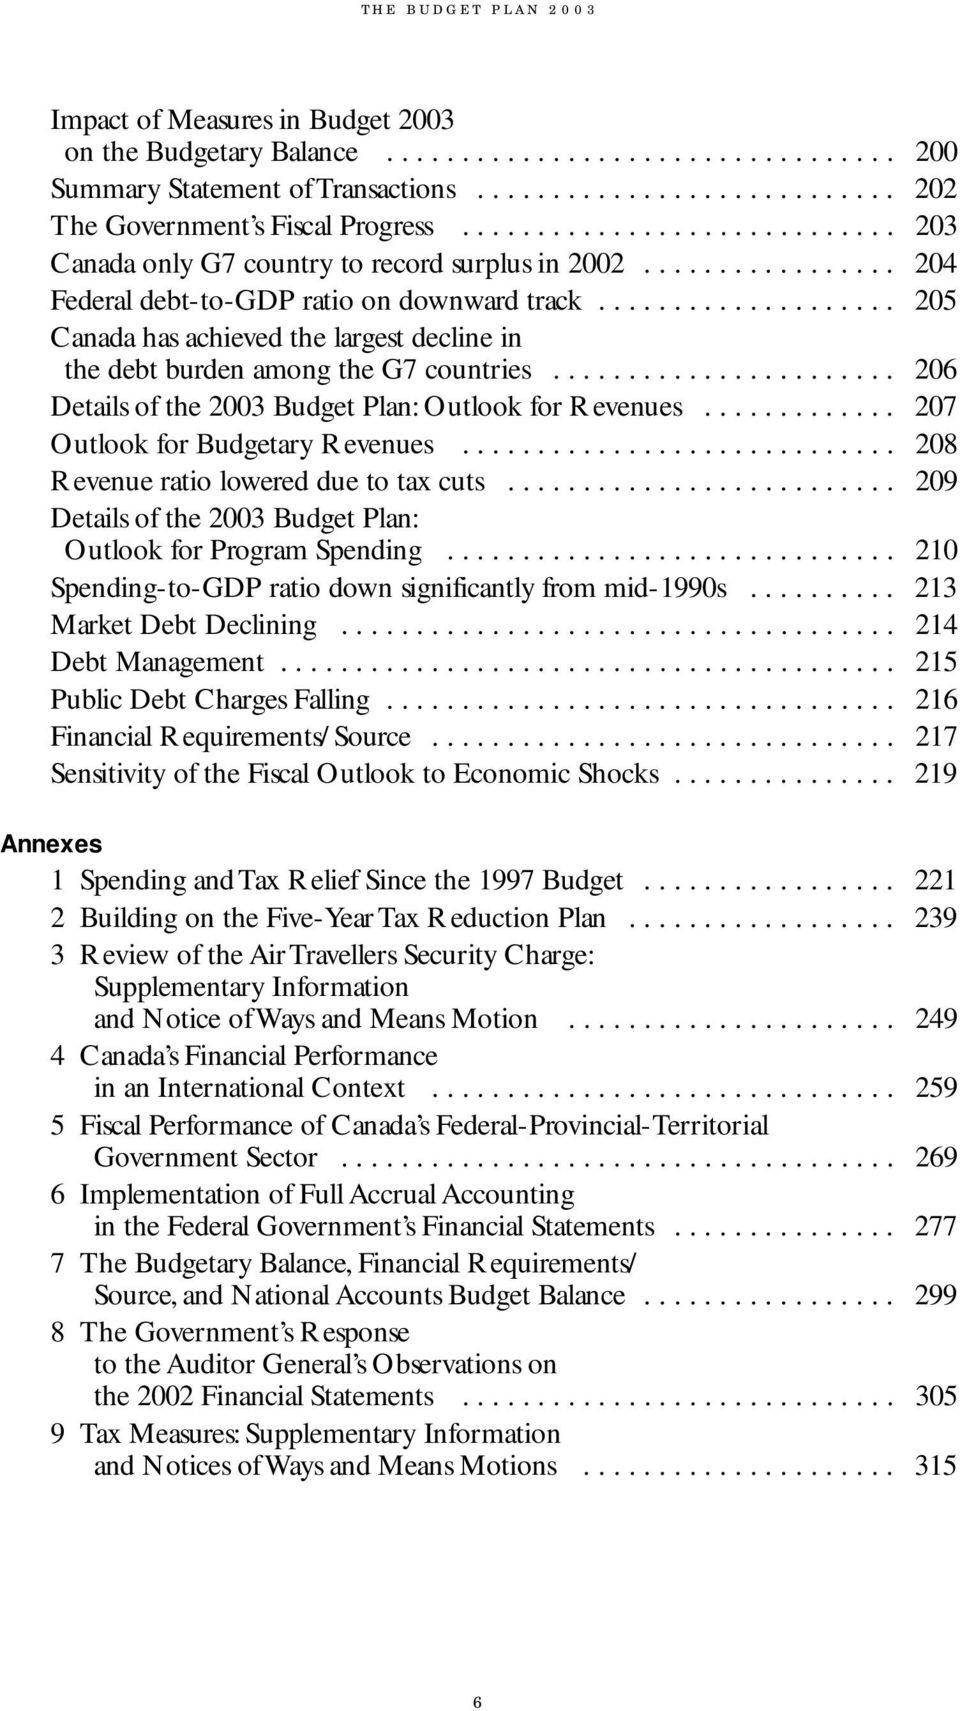 ................... 205 Canada has achieved the largest decline in the debt burden among the G7 countries....................... 206 Details of the 2003 Budget Plan: Outlook for Revenues.